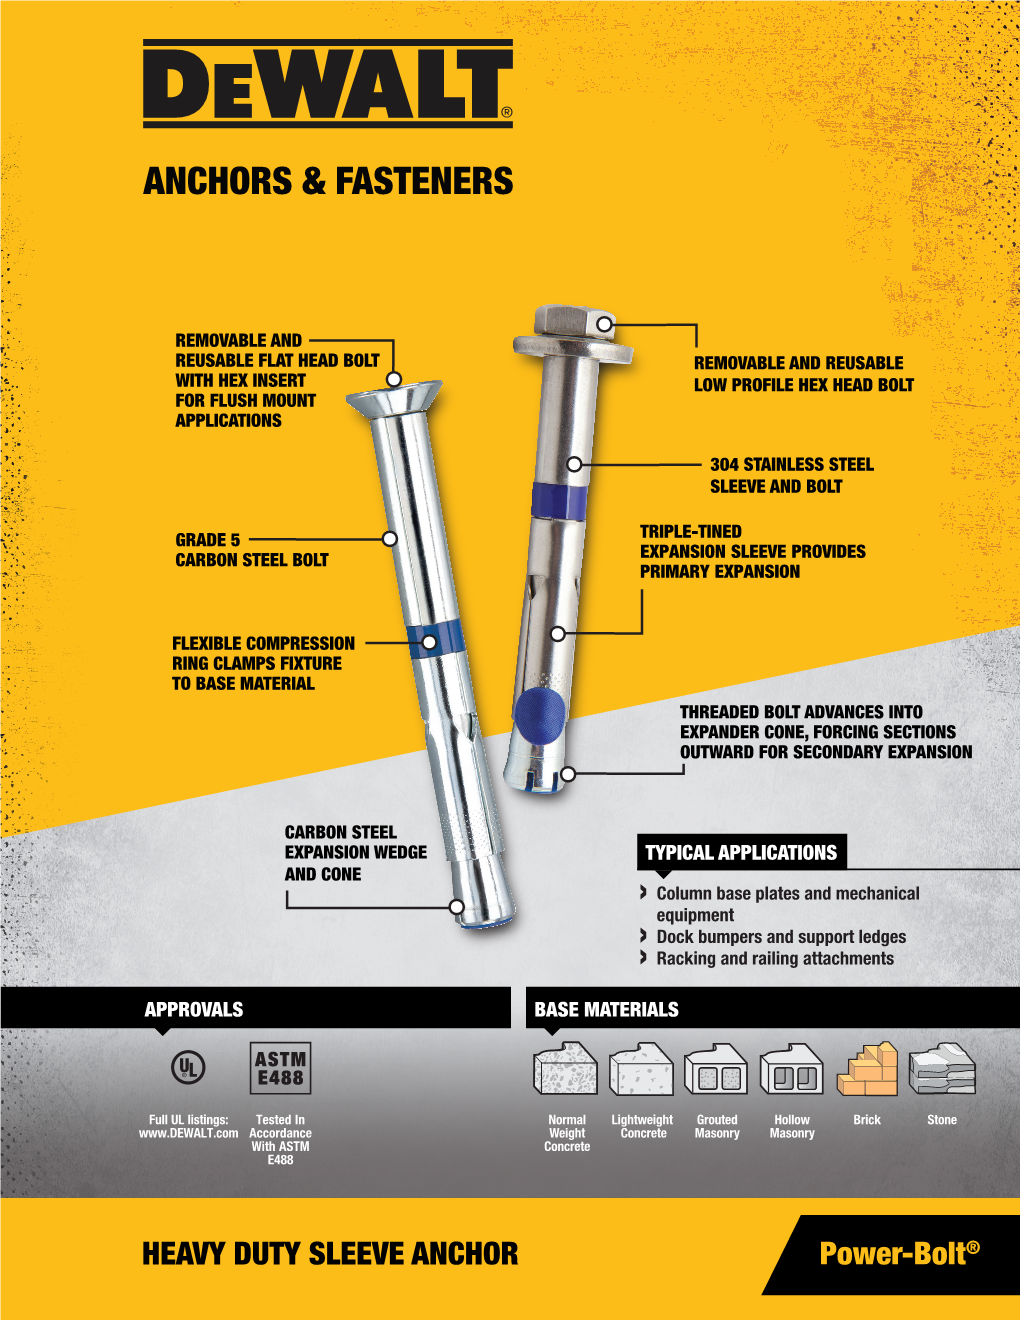 Anchors & Fasteners